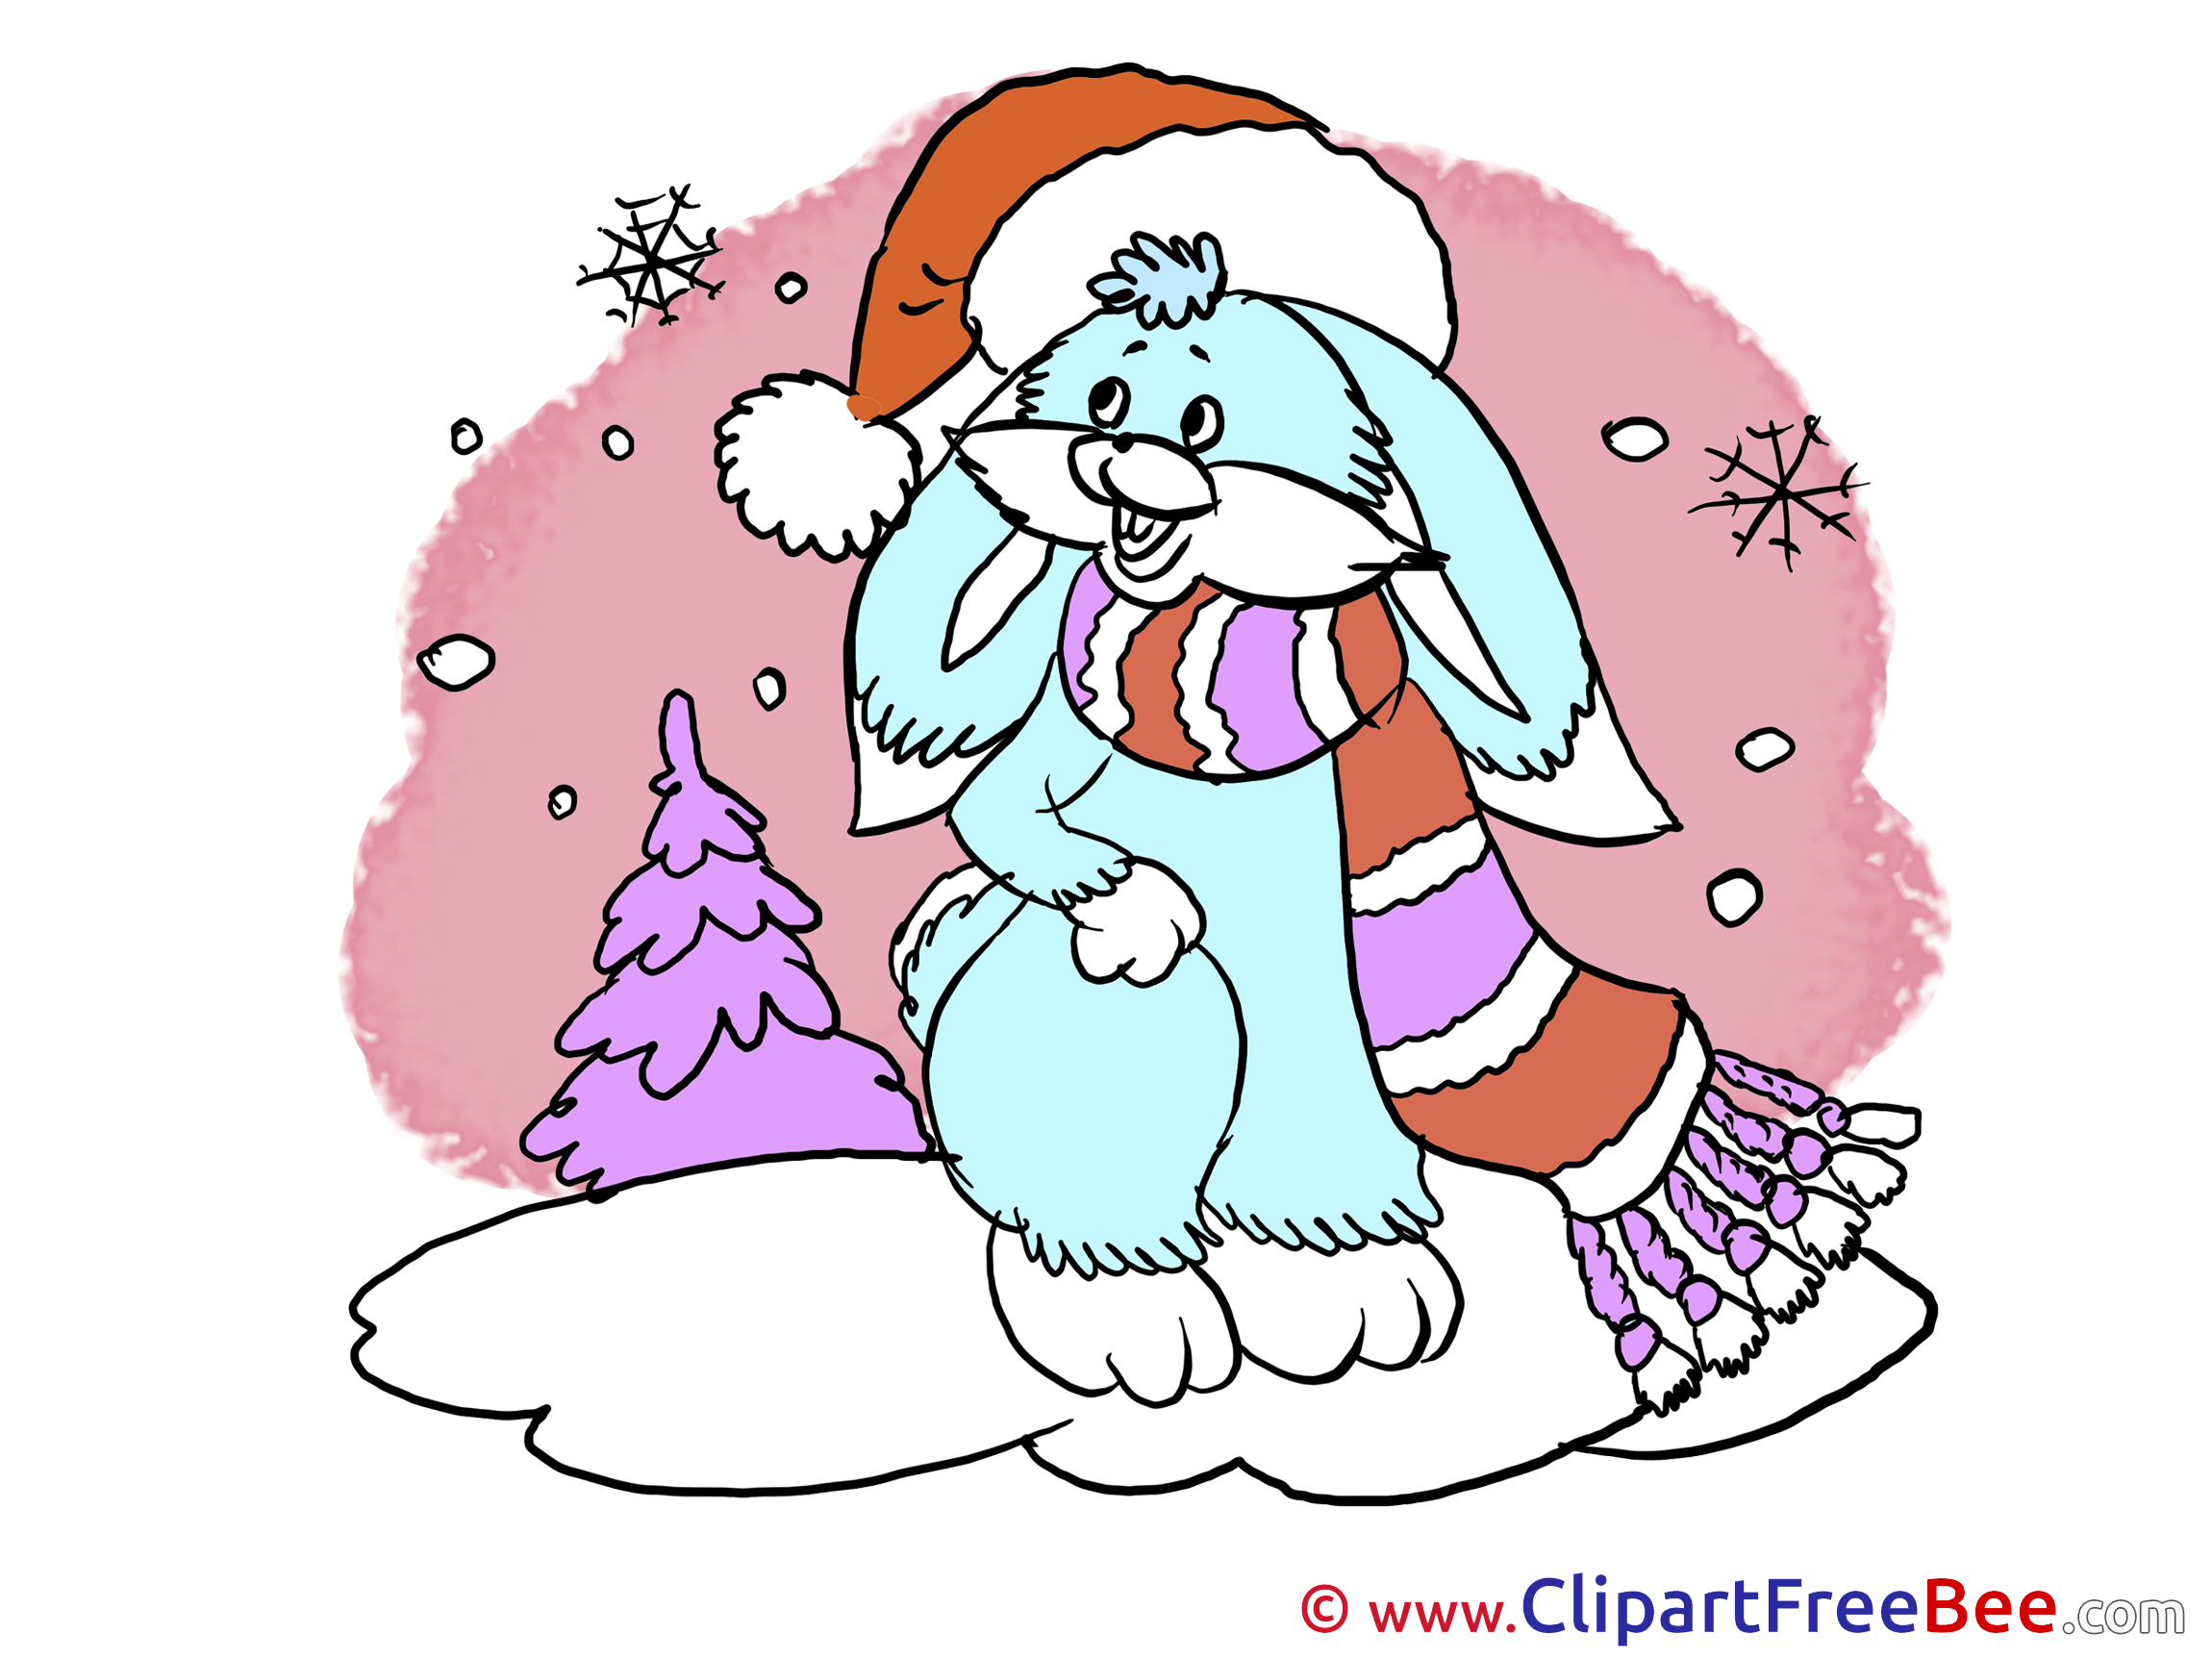 Hare Snow Winter free Images download